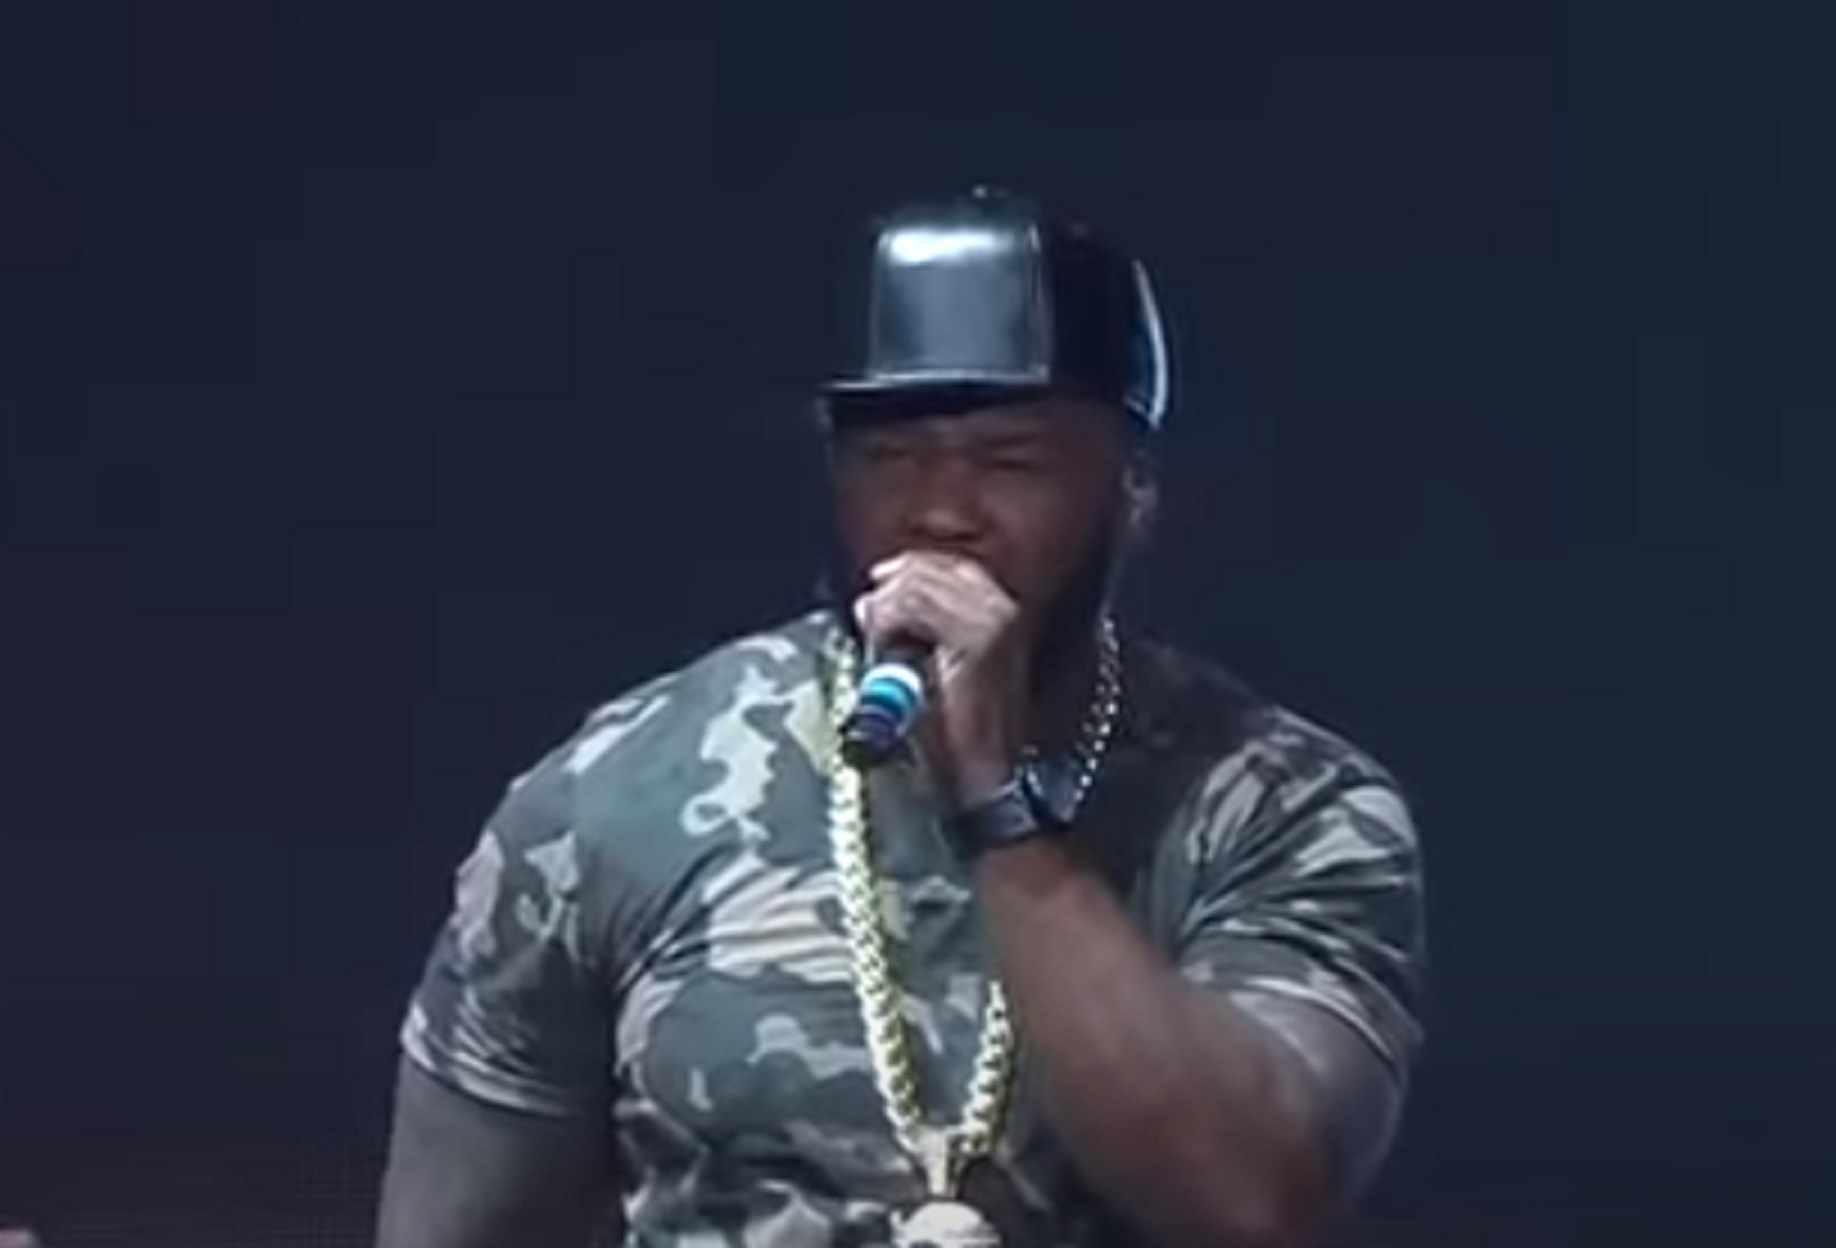 50 Cent Getting Booed Off Stage In Atlanta Goes Viral Again In Response to Him Dissing T.I.